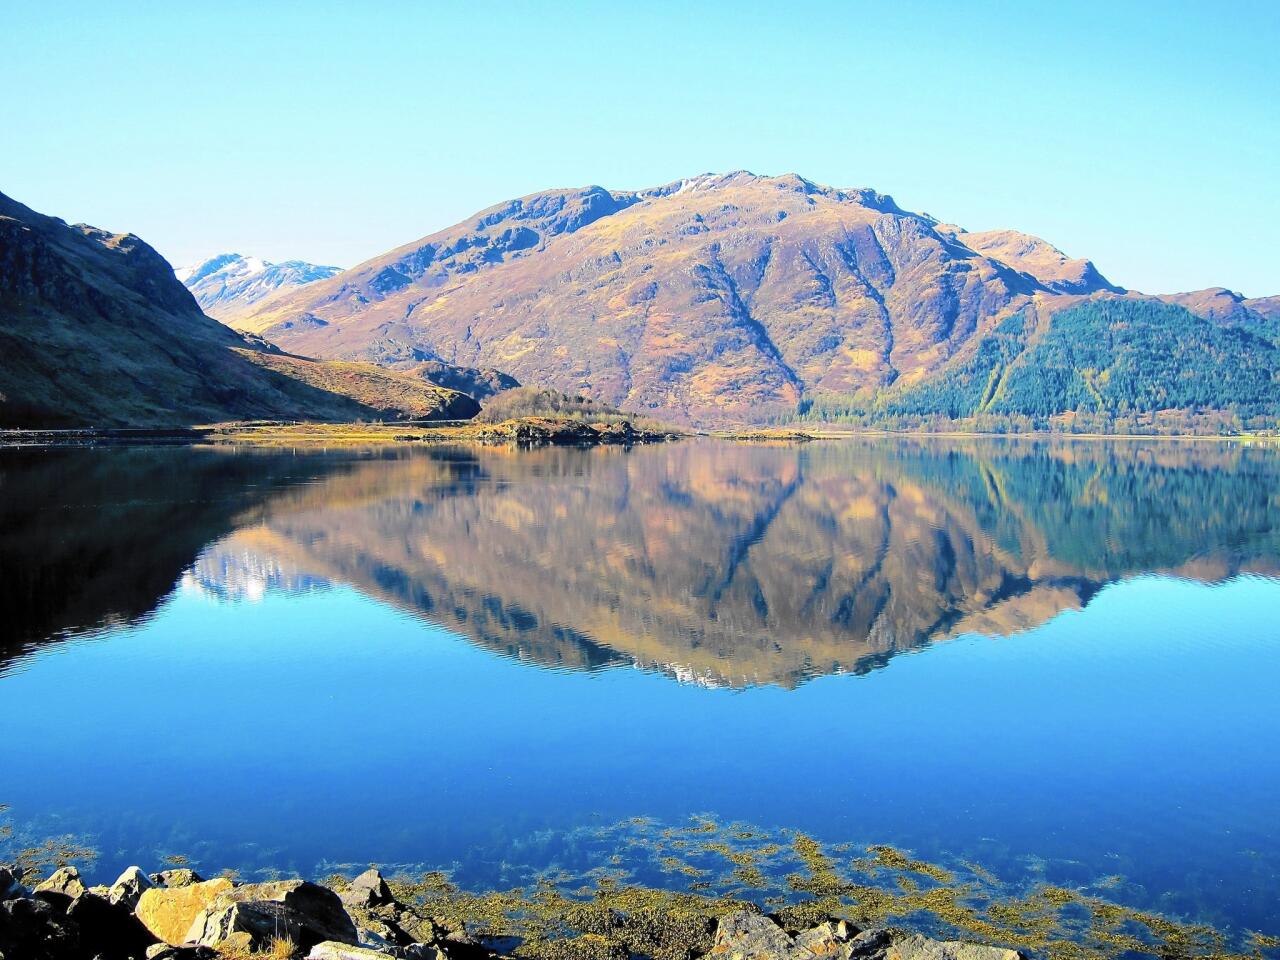 The Scottish Highlands seduce visitors with ever-changing landscapes of rugged natural beauty.